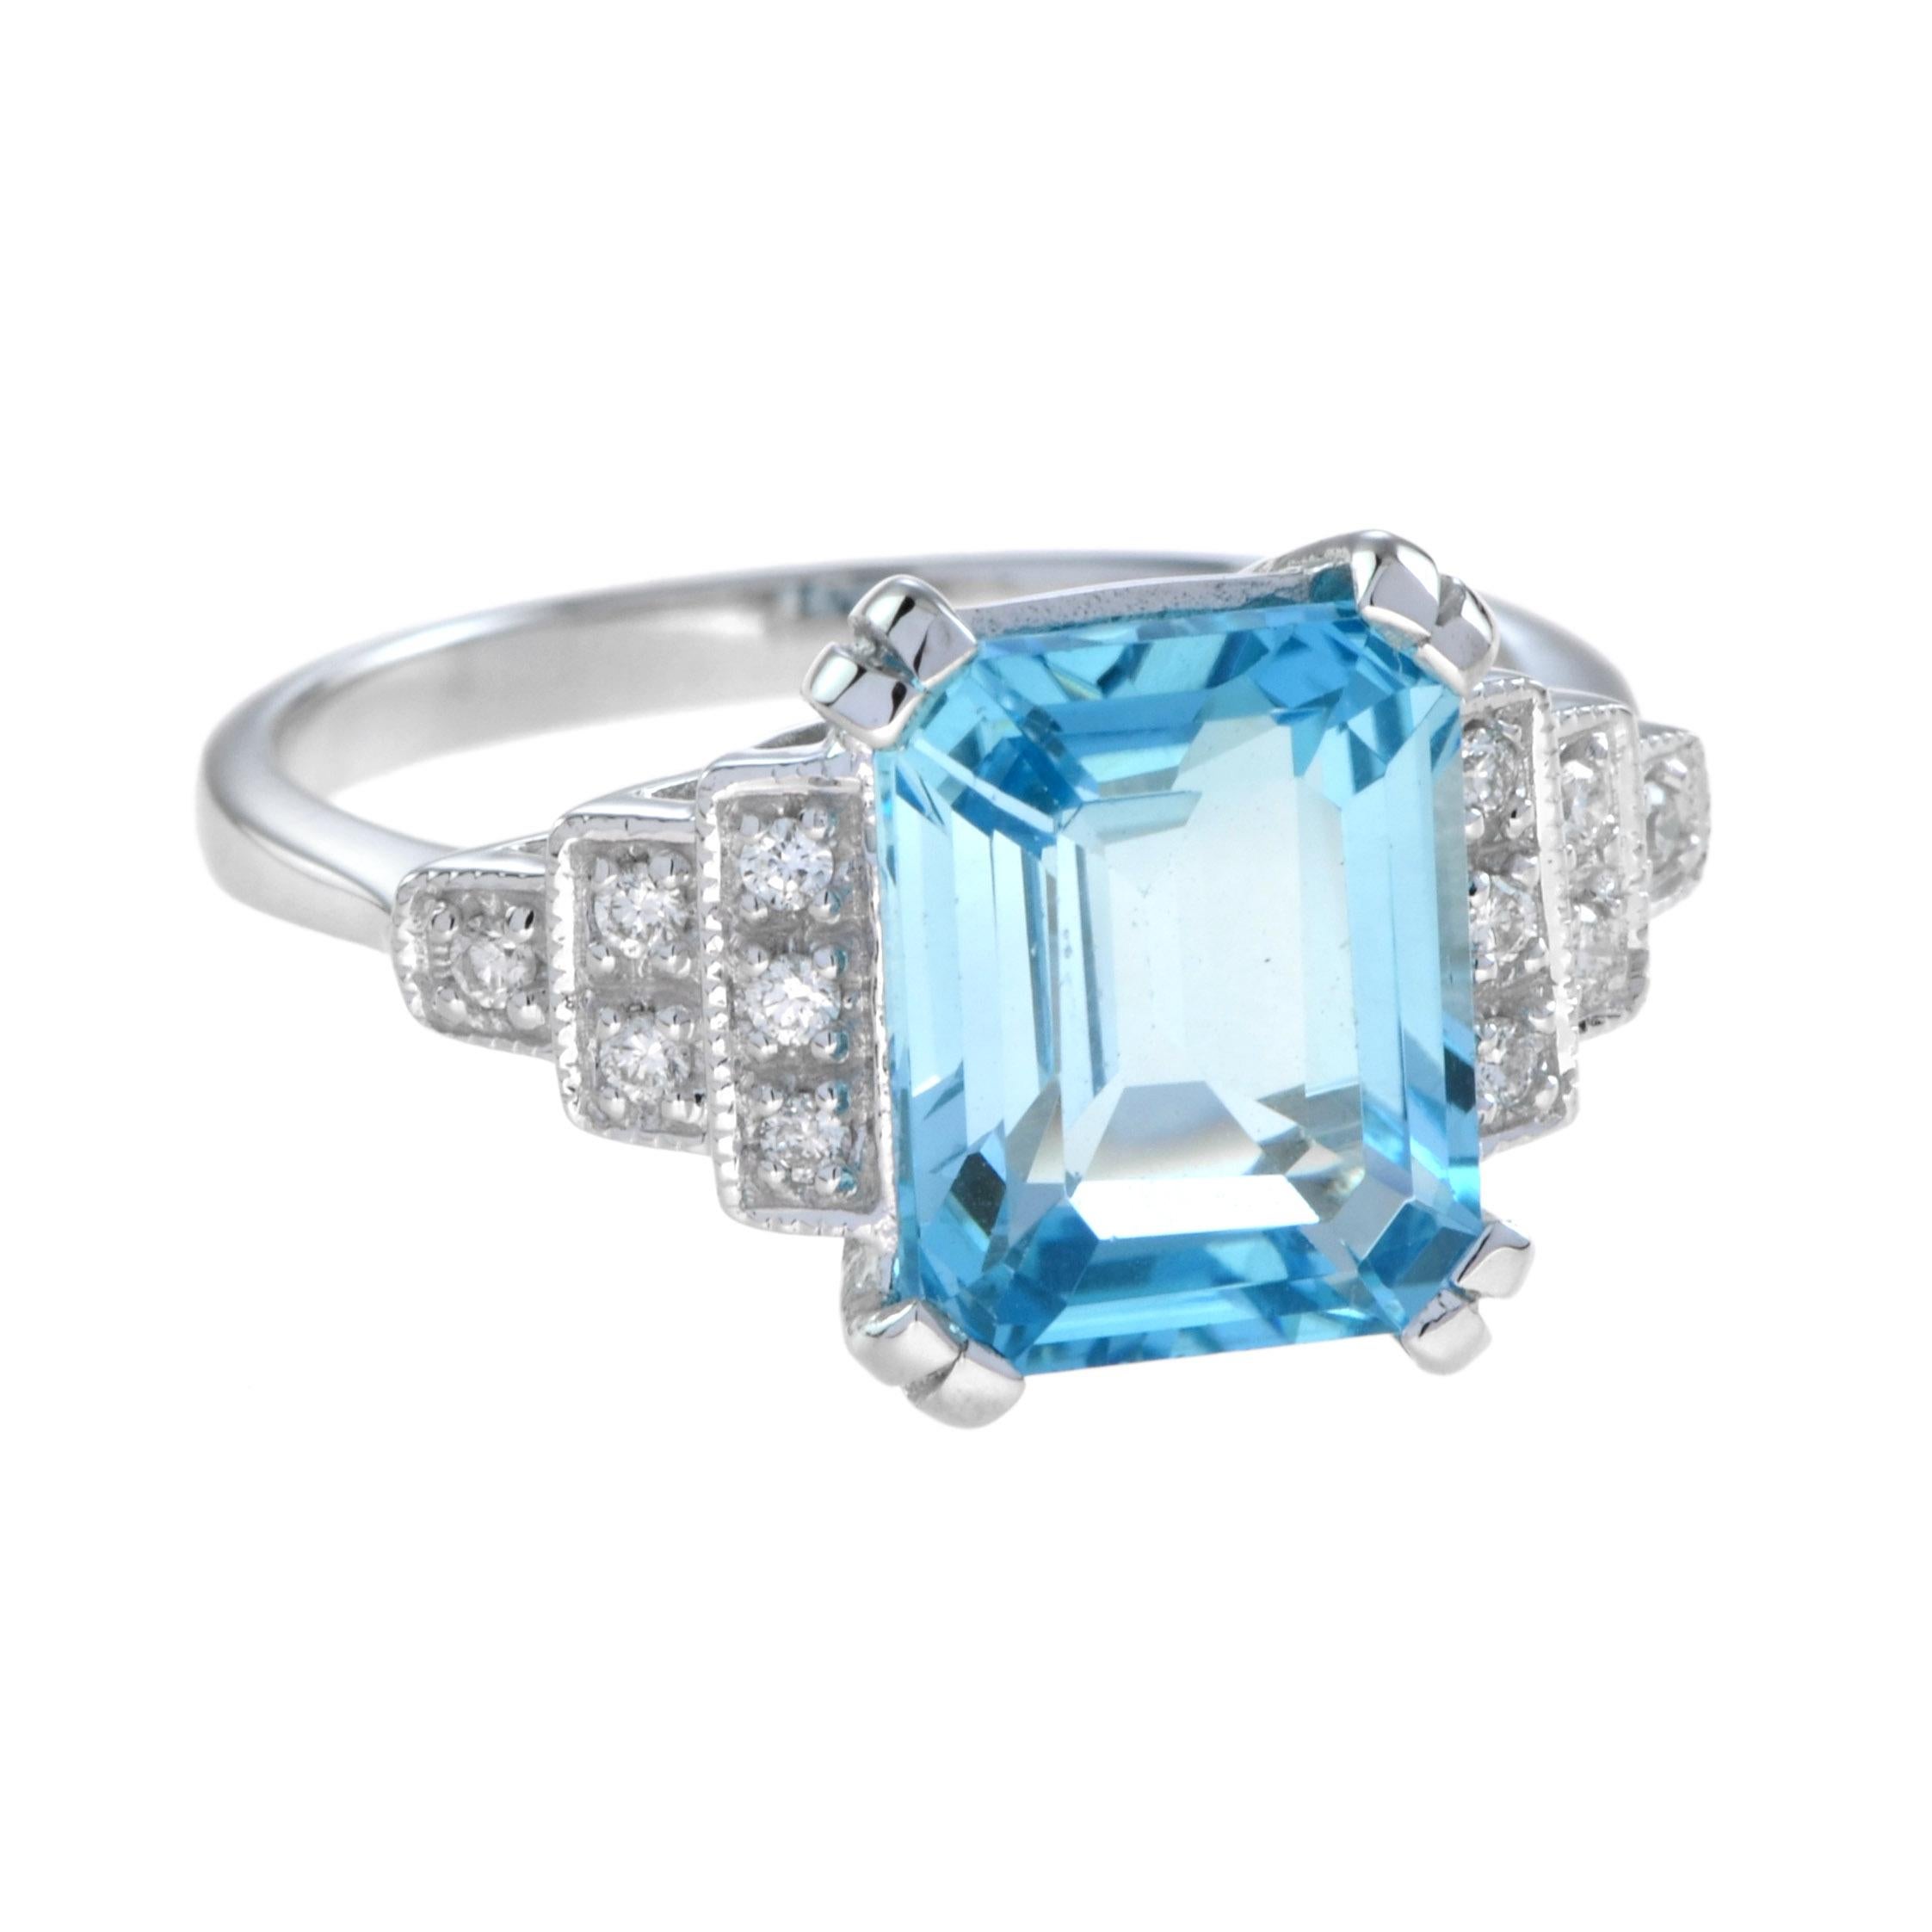 For Sale:  Emerald Cut Blue Topaz and Step Diamond Engagement Ring in 18K White Gold 2